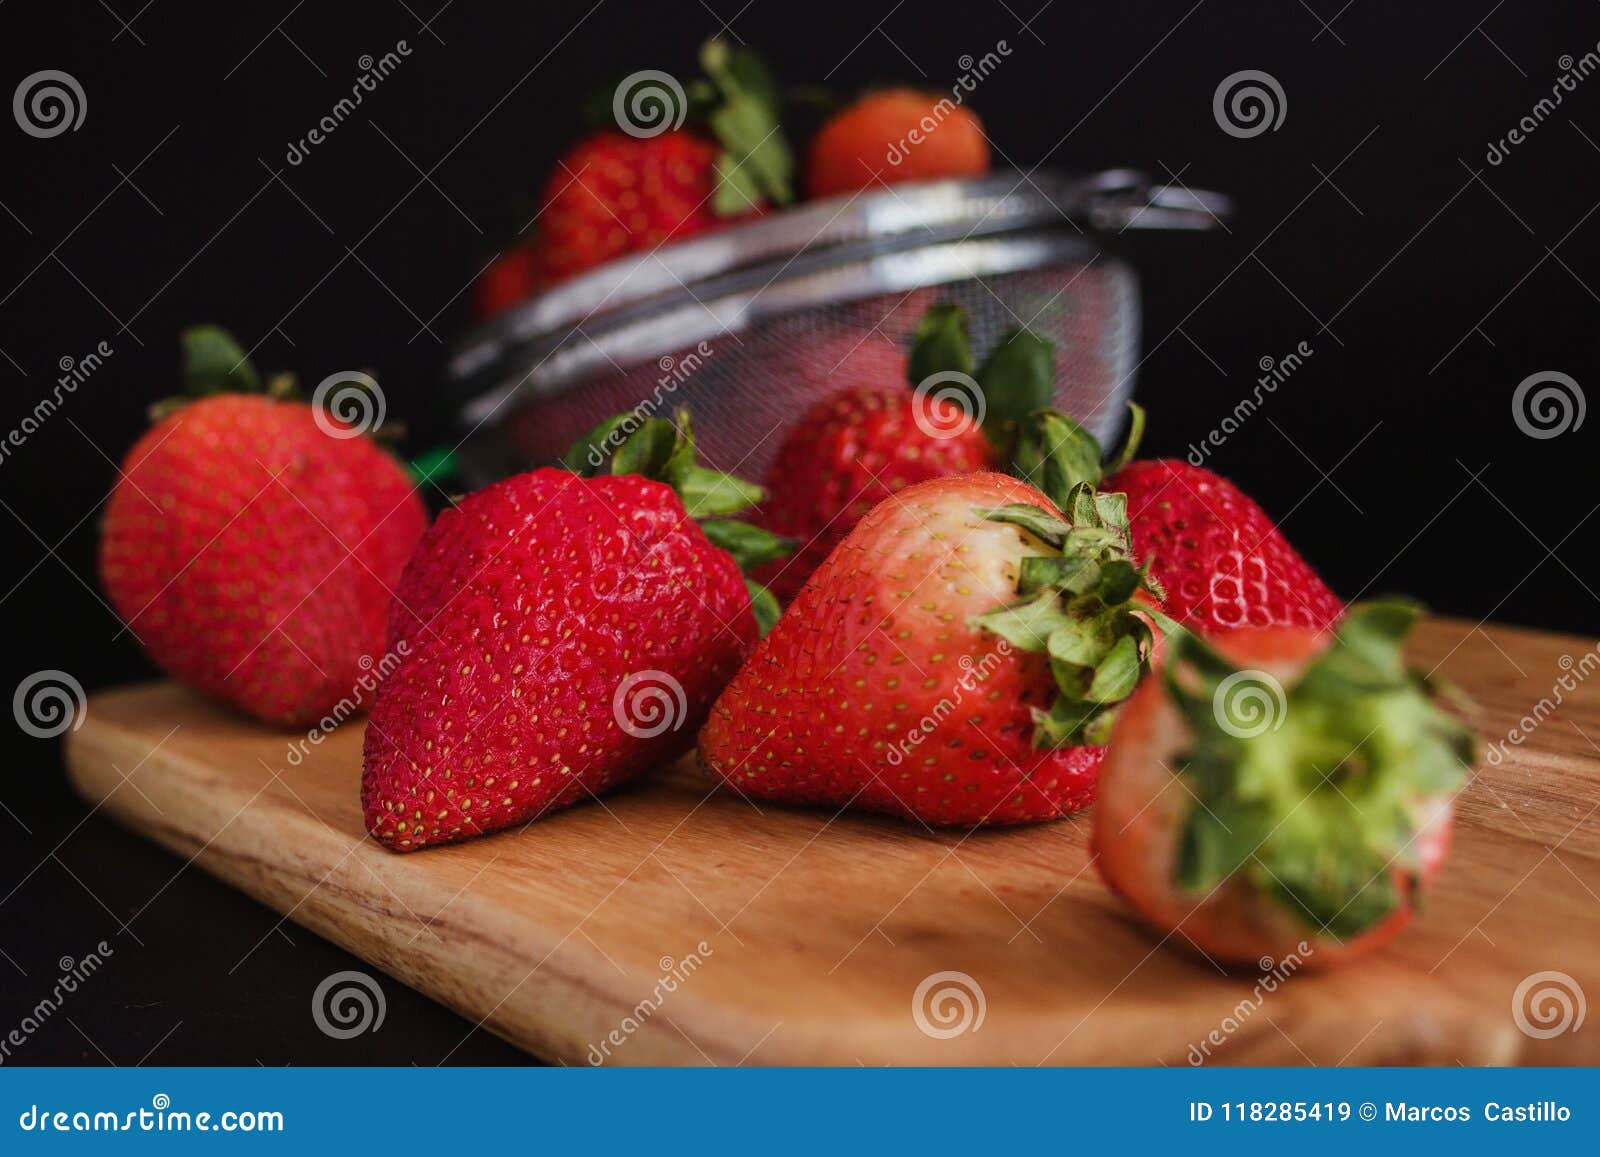 strawberries in a black background